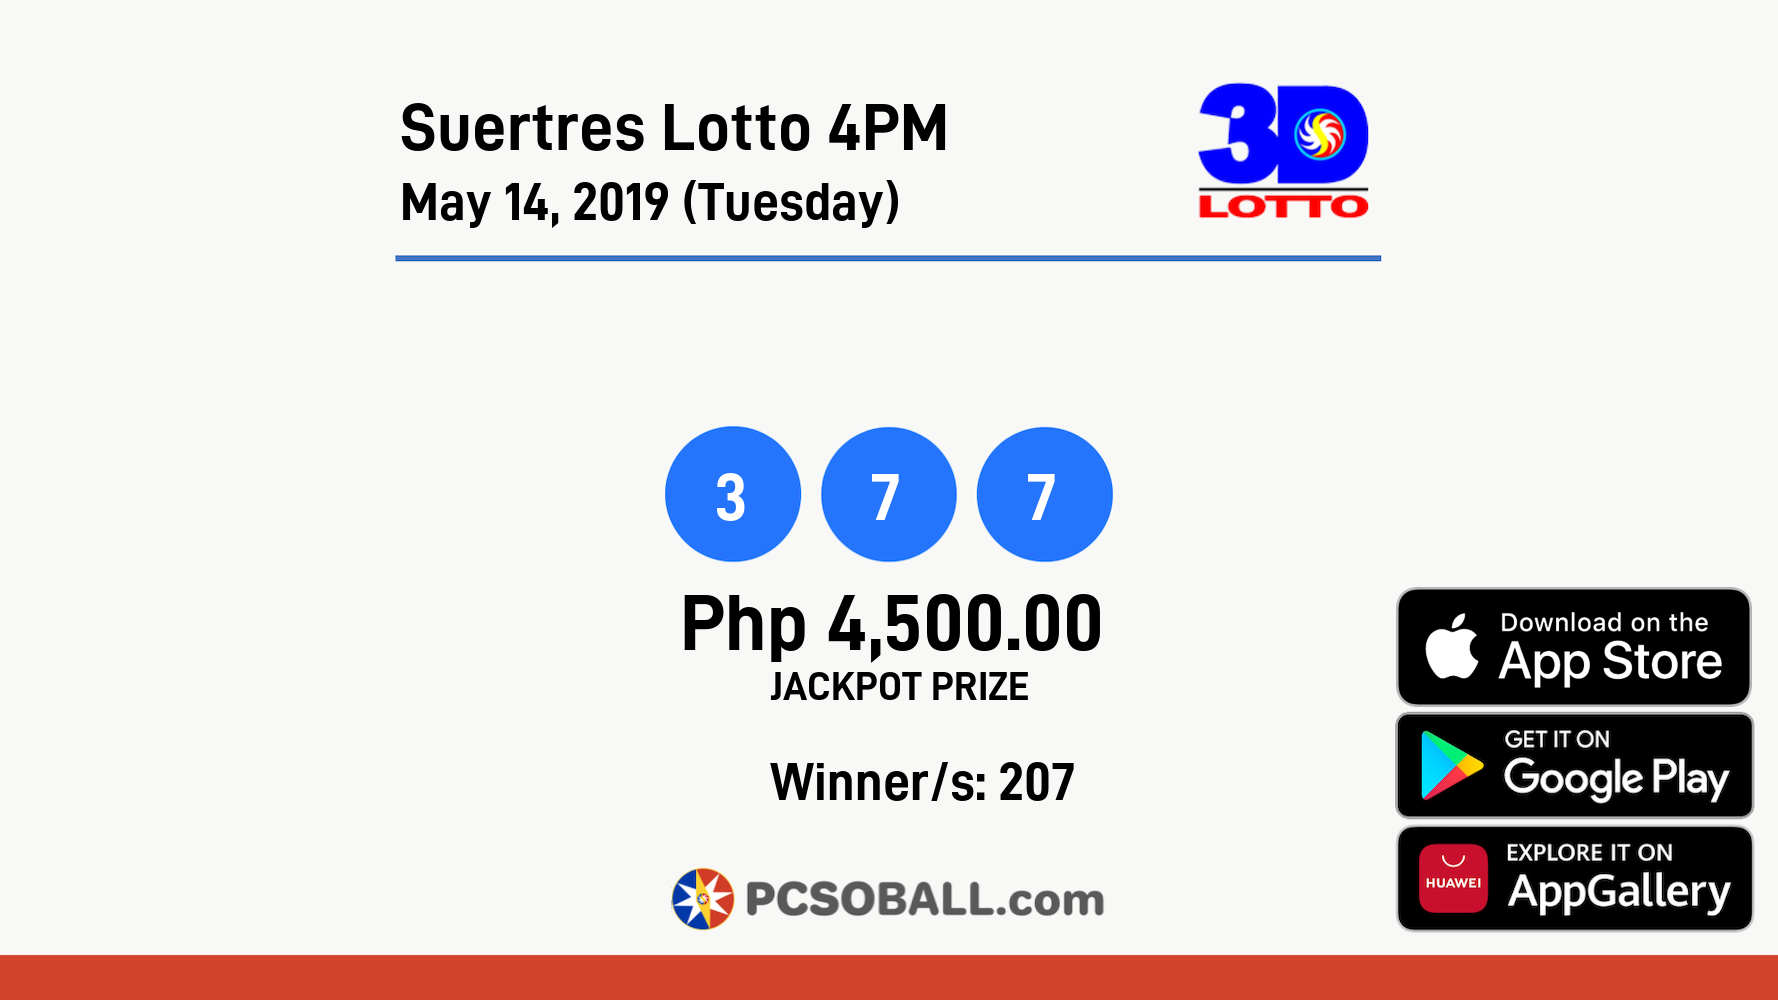 Suertres Lotto 4PM May 14, 2019 (Tuesday) Result